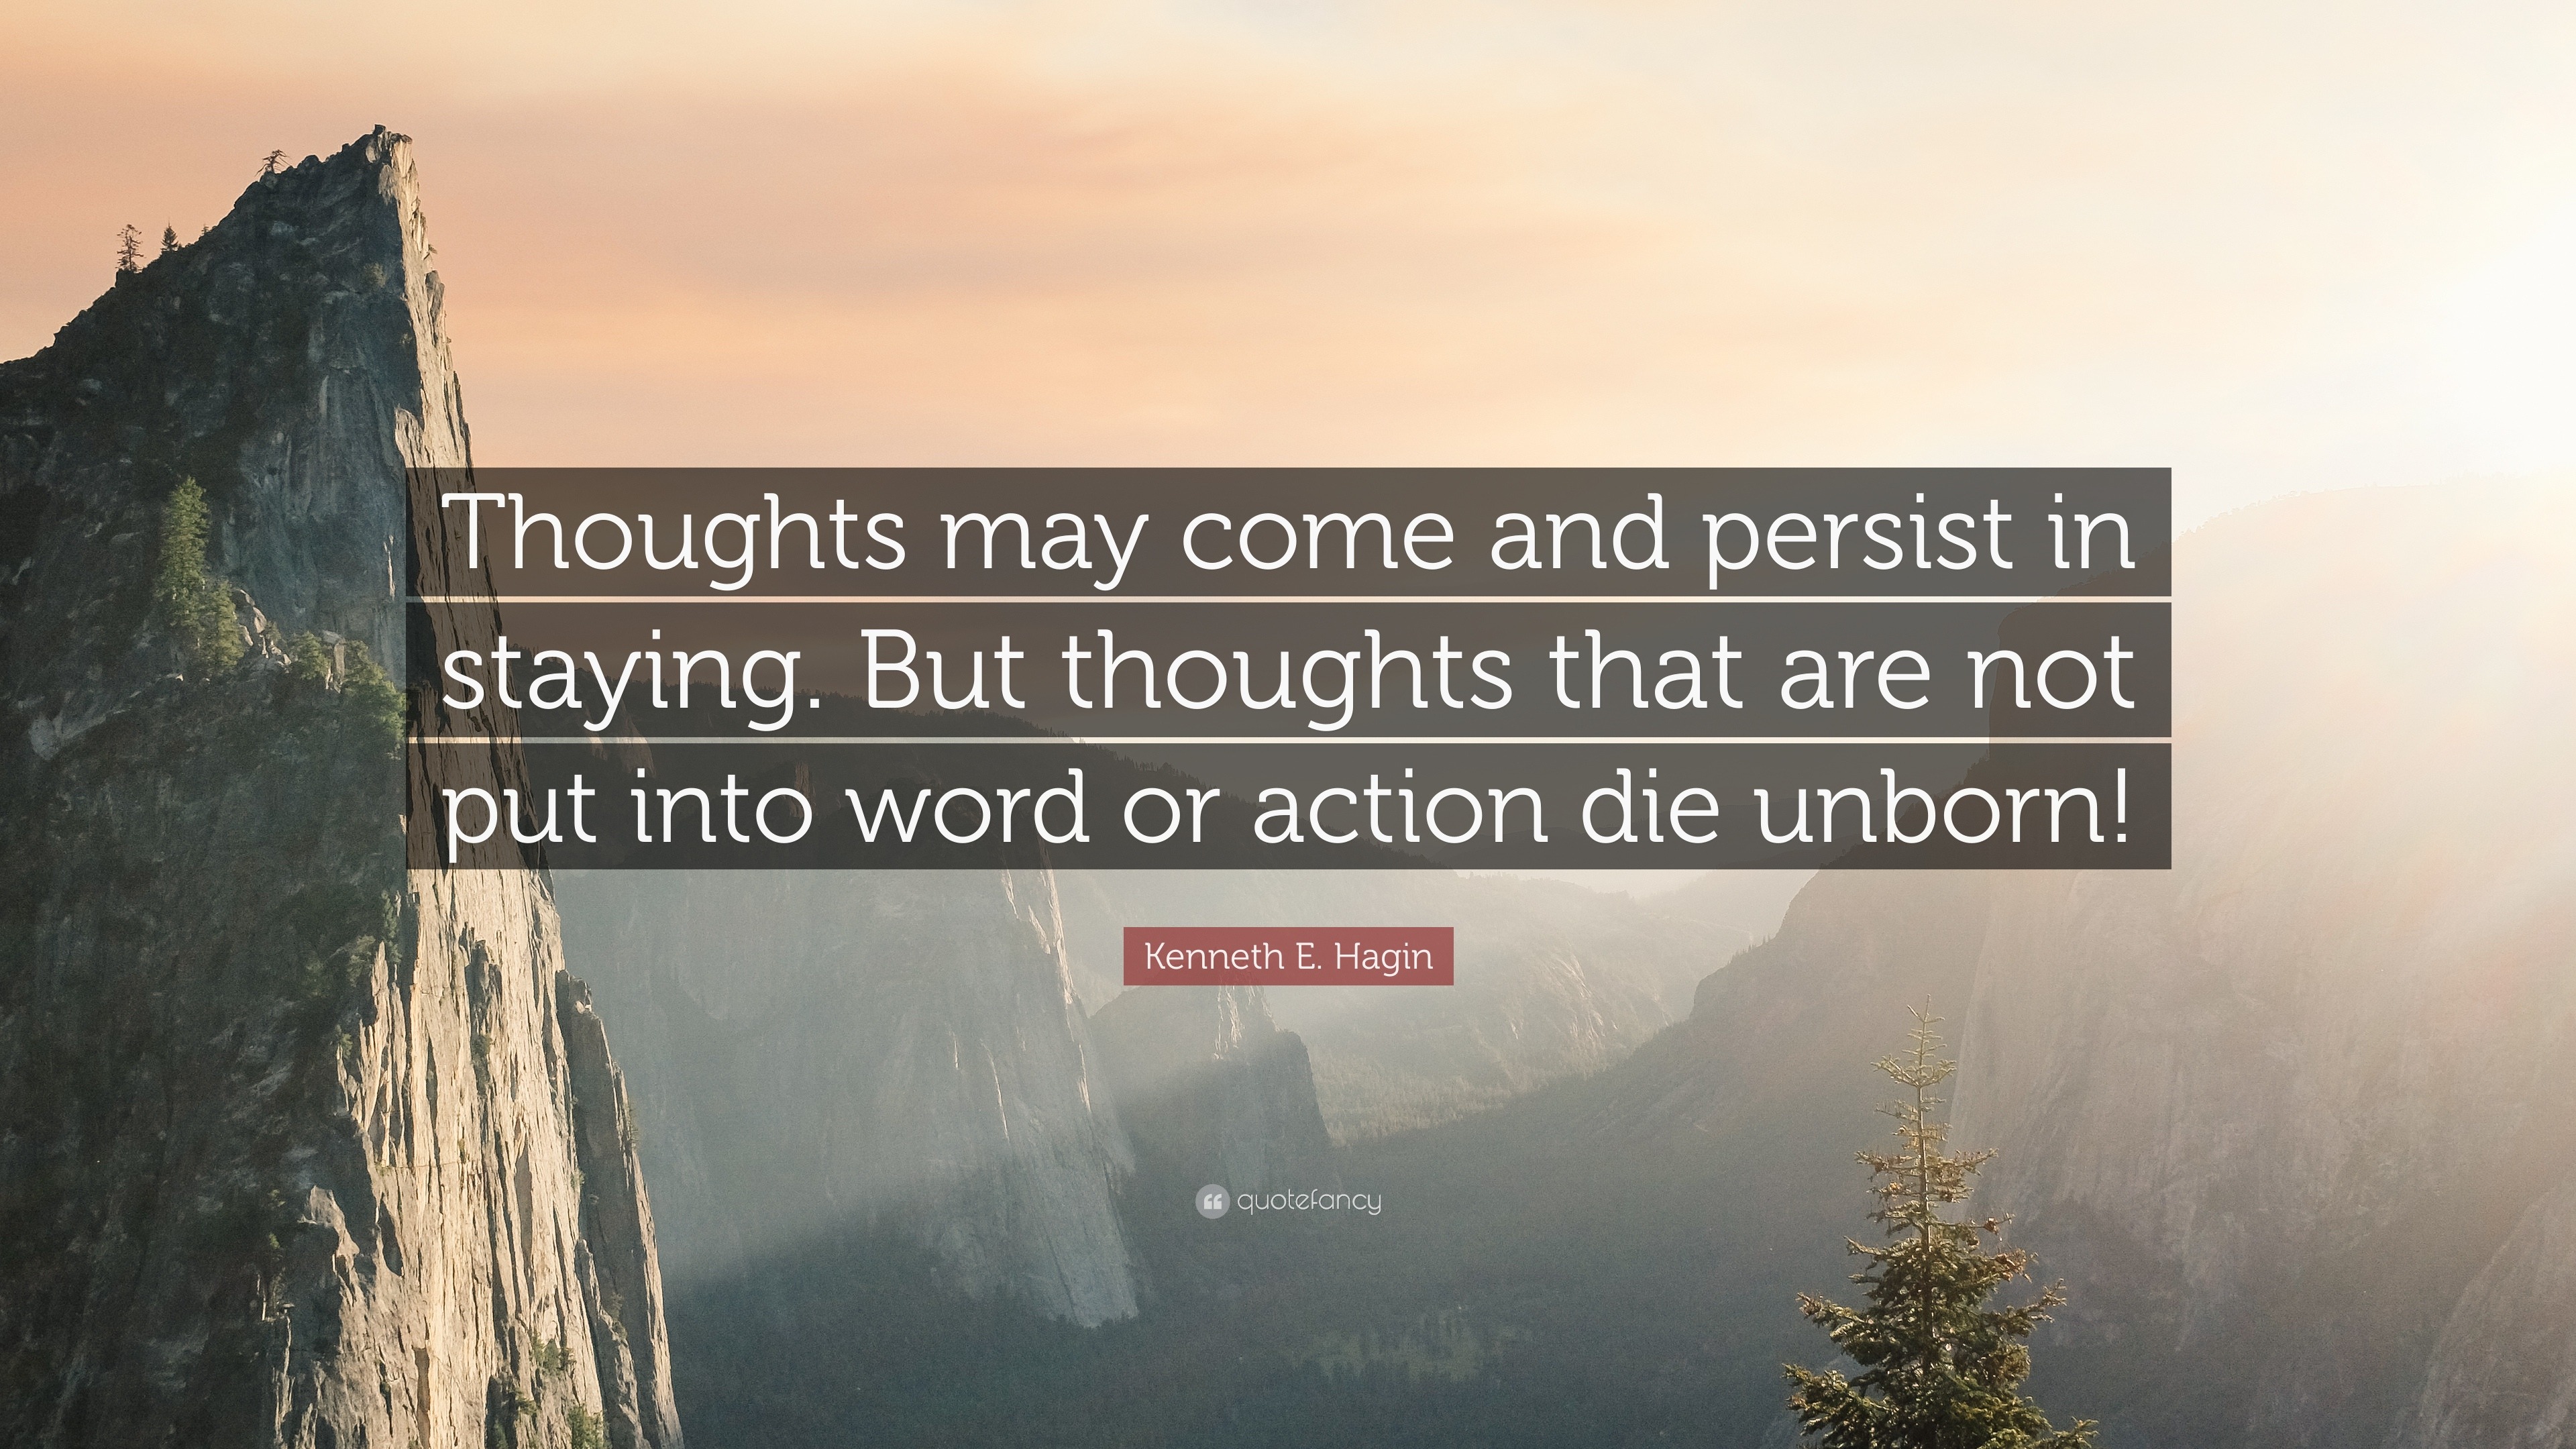 Kenneth E. Hagin Quote: “Thoughts may come and persist in staying. But ...